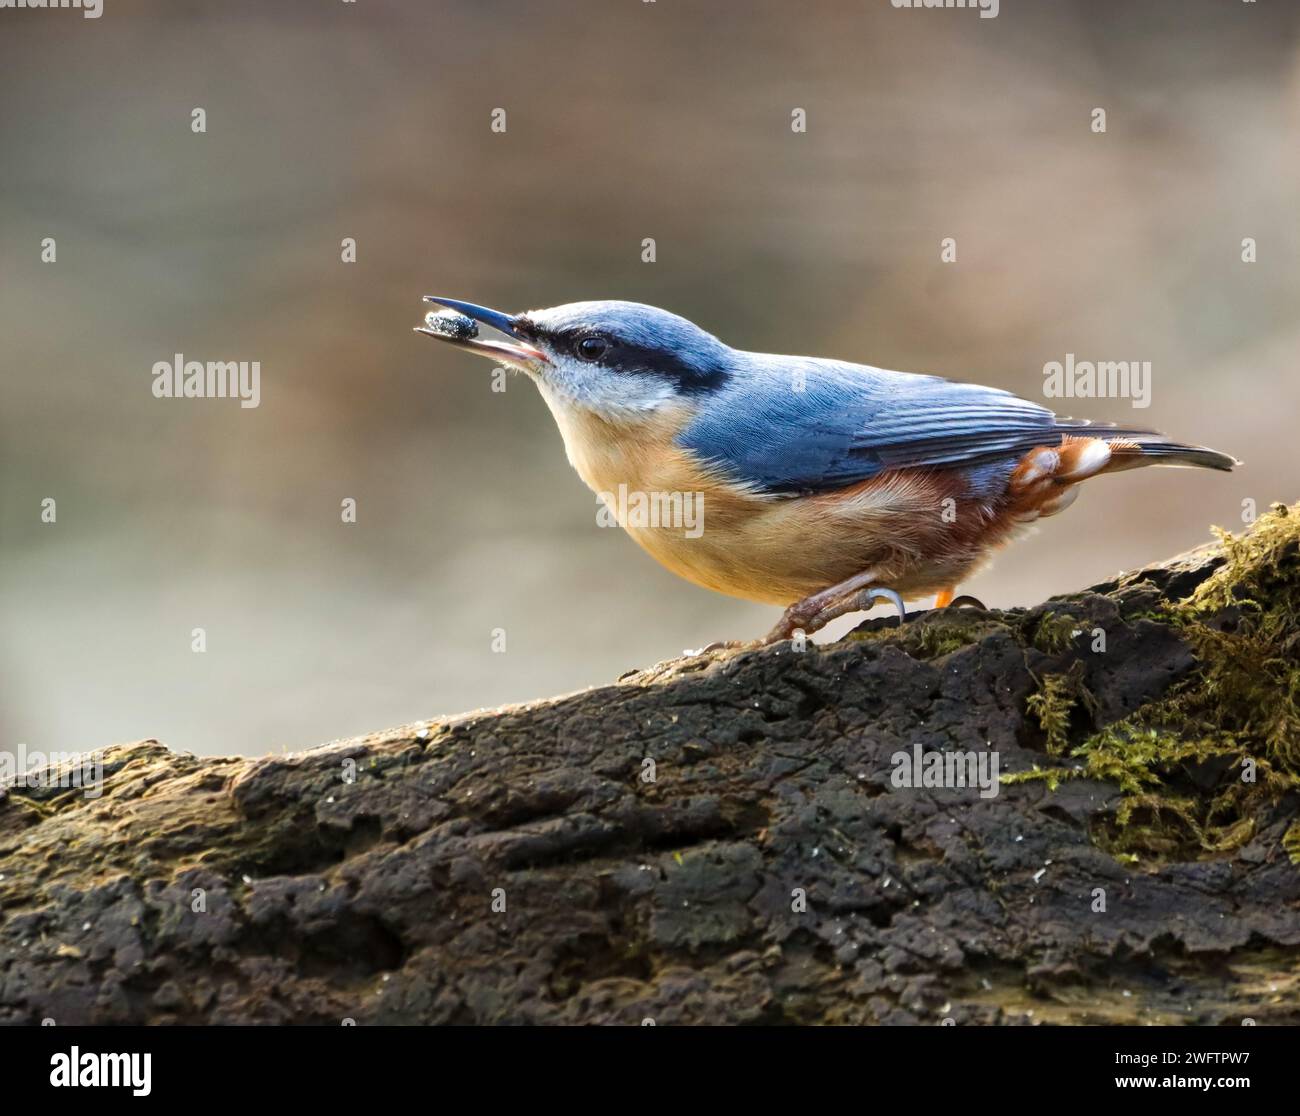 A tiny bird perches on a branch, searching for nourishment Stock Photo